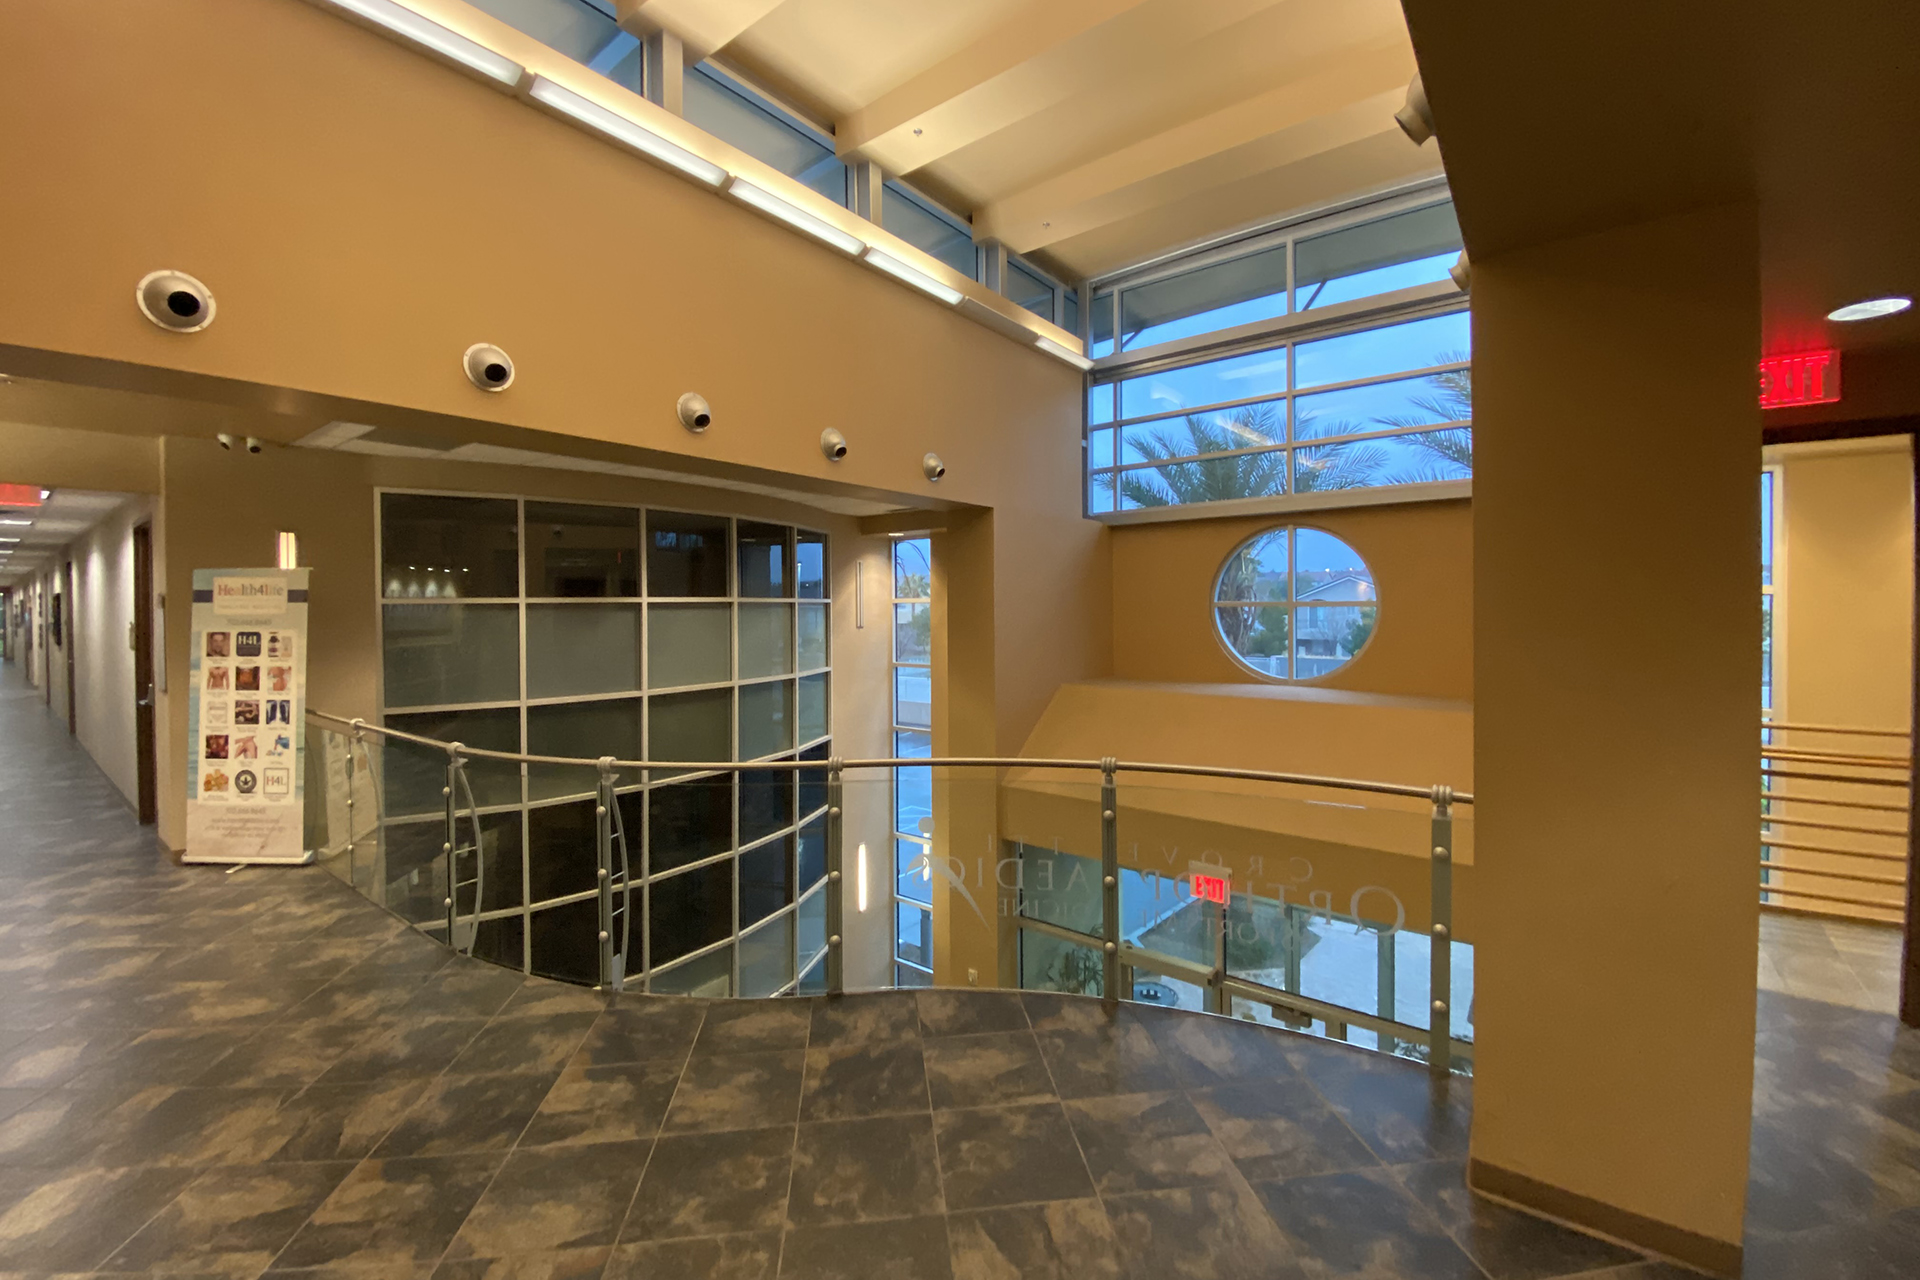 Interior view of the second floor for Crovetti Orthopaedics in Nevada